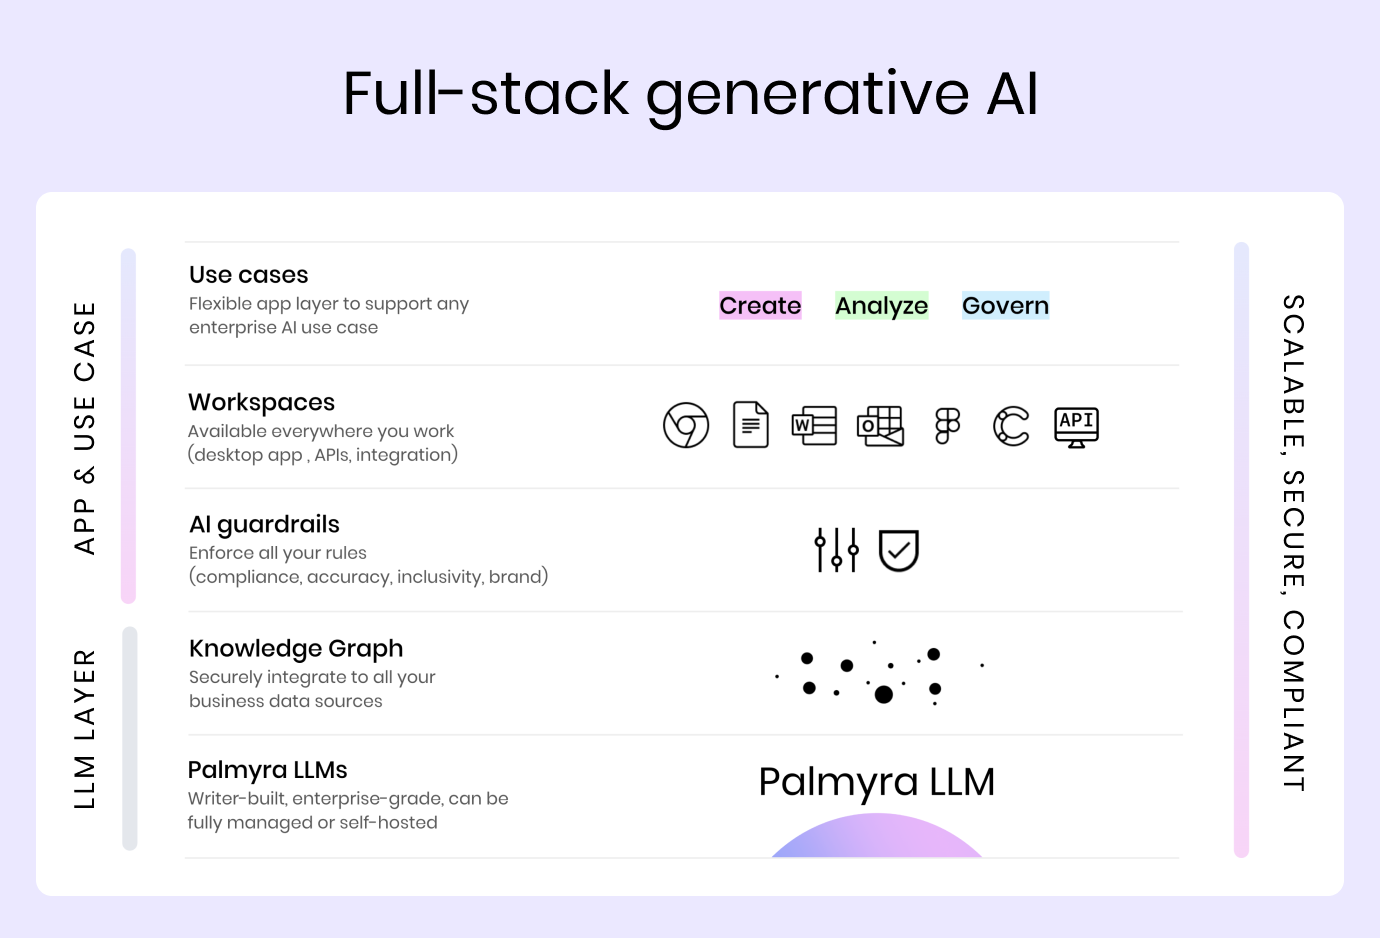 A diagram demonstrating the layers of the Writer full-stack generative AI platform. The LLM layer includes Palmyra LLMs and Knowledge Graph. The apps and use case layer includes AI guardrails, workspaces, and use cases.  